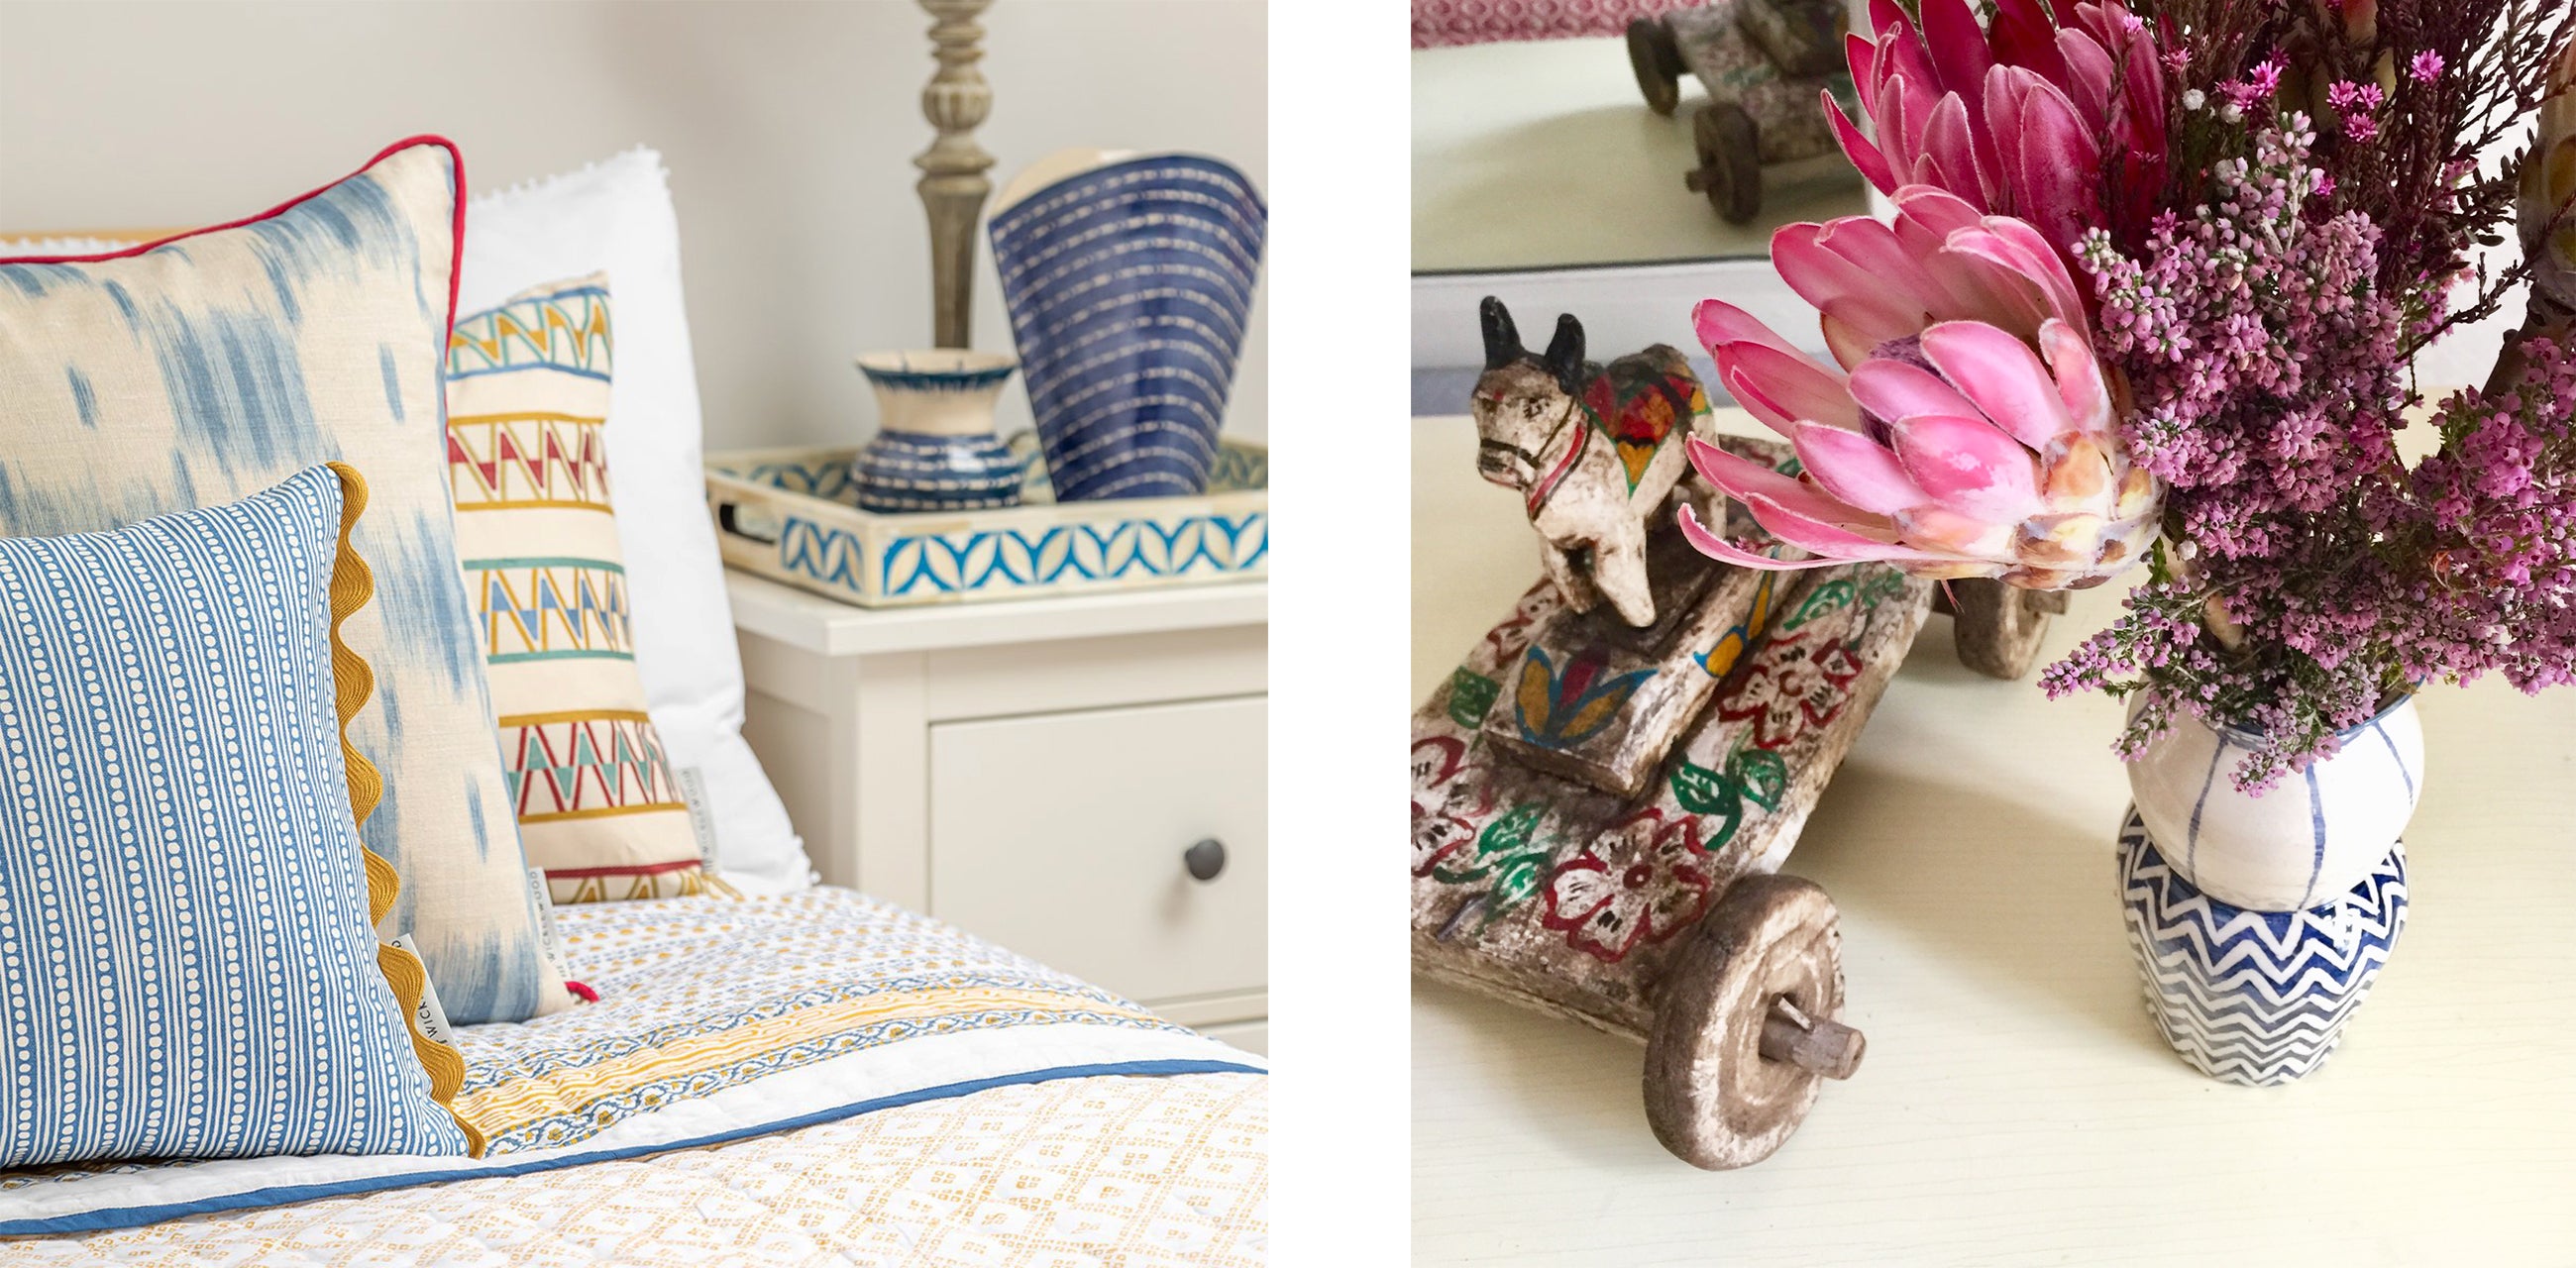 wicklewood bedside details include ceramics, nandi cows and indian inlays